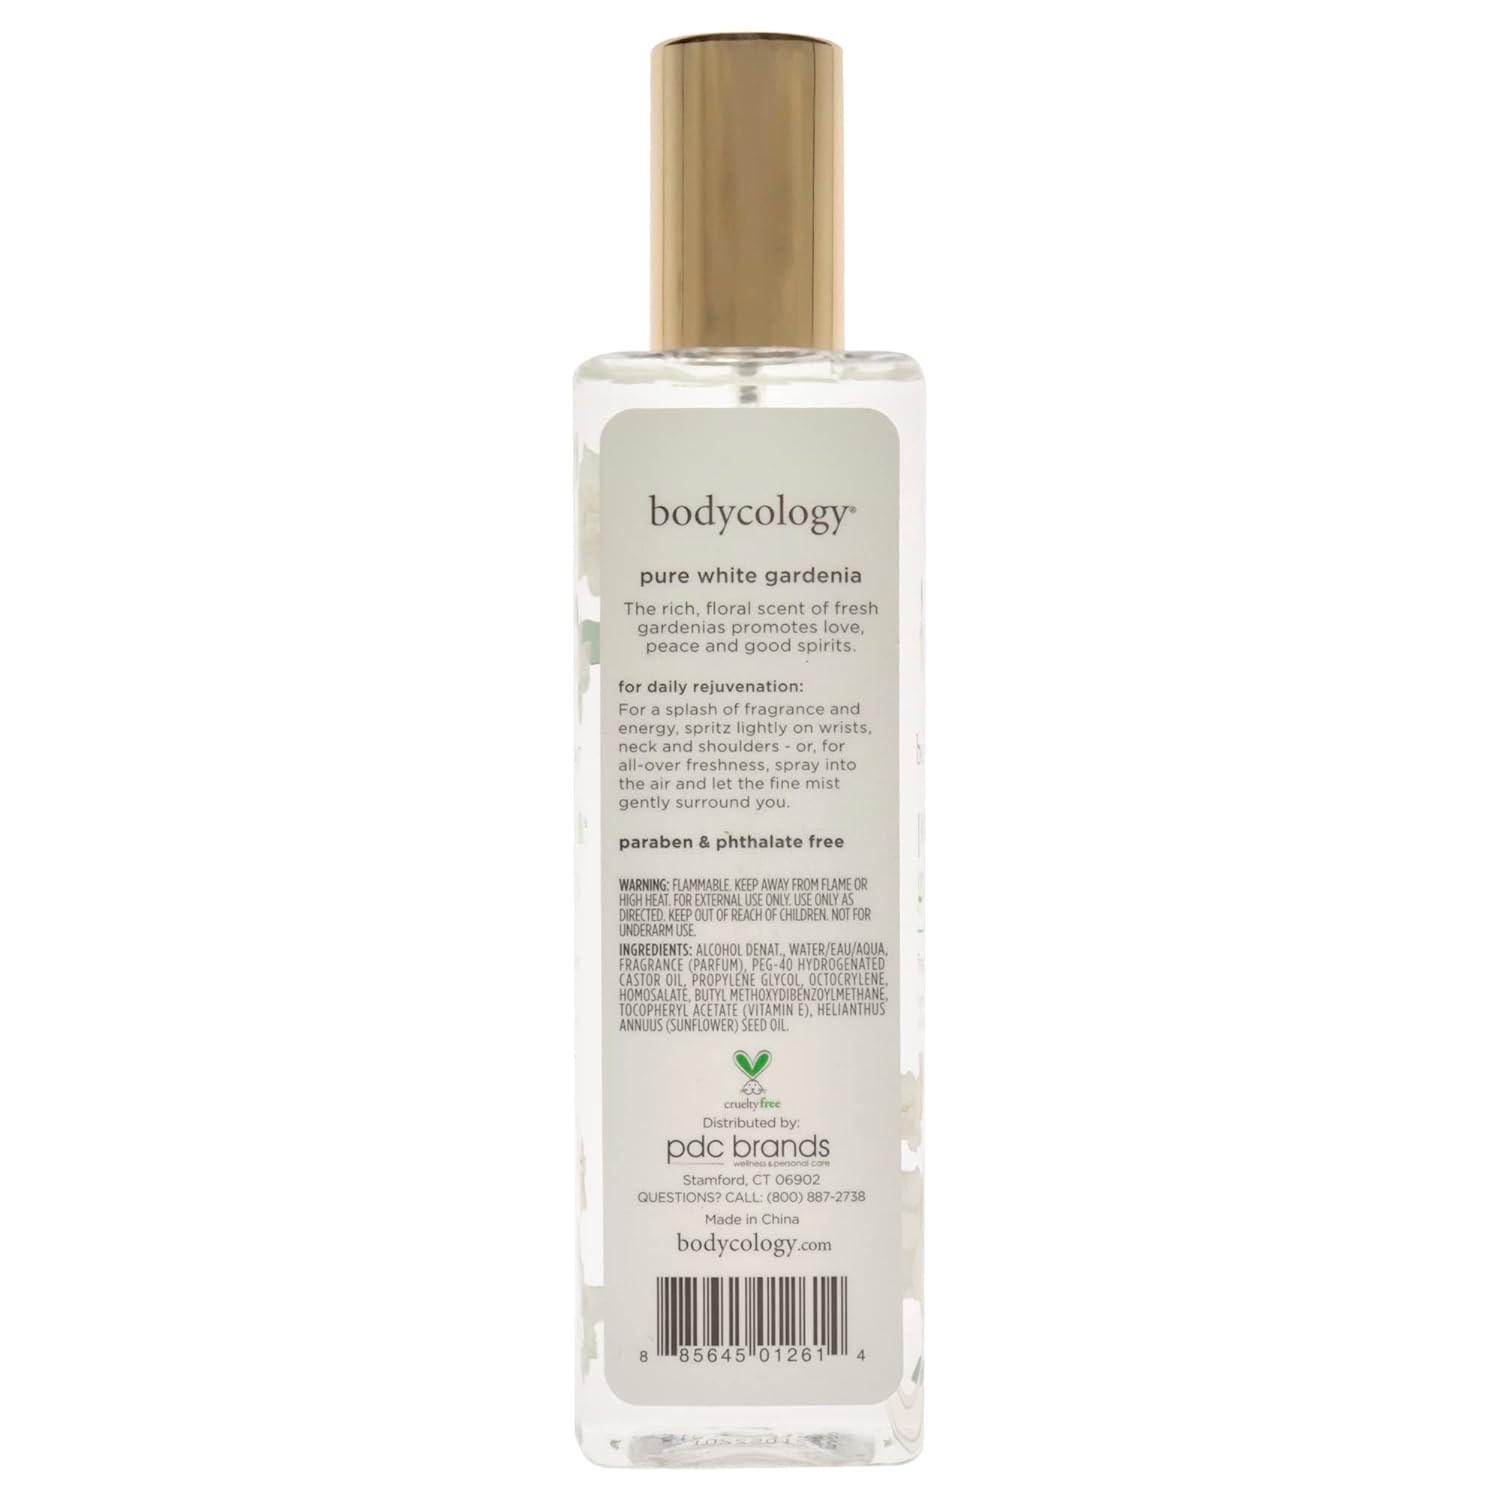 Bodycology Pure White Gardenia by Bodycology Fragrance Mist Spray 8 oz for Women - image 2 of 3